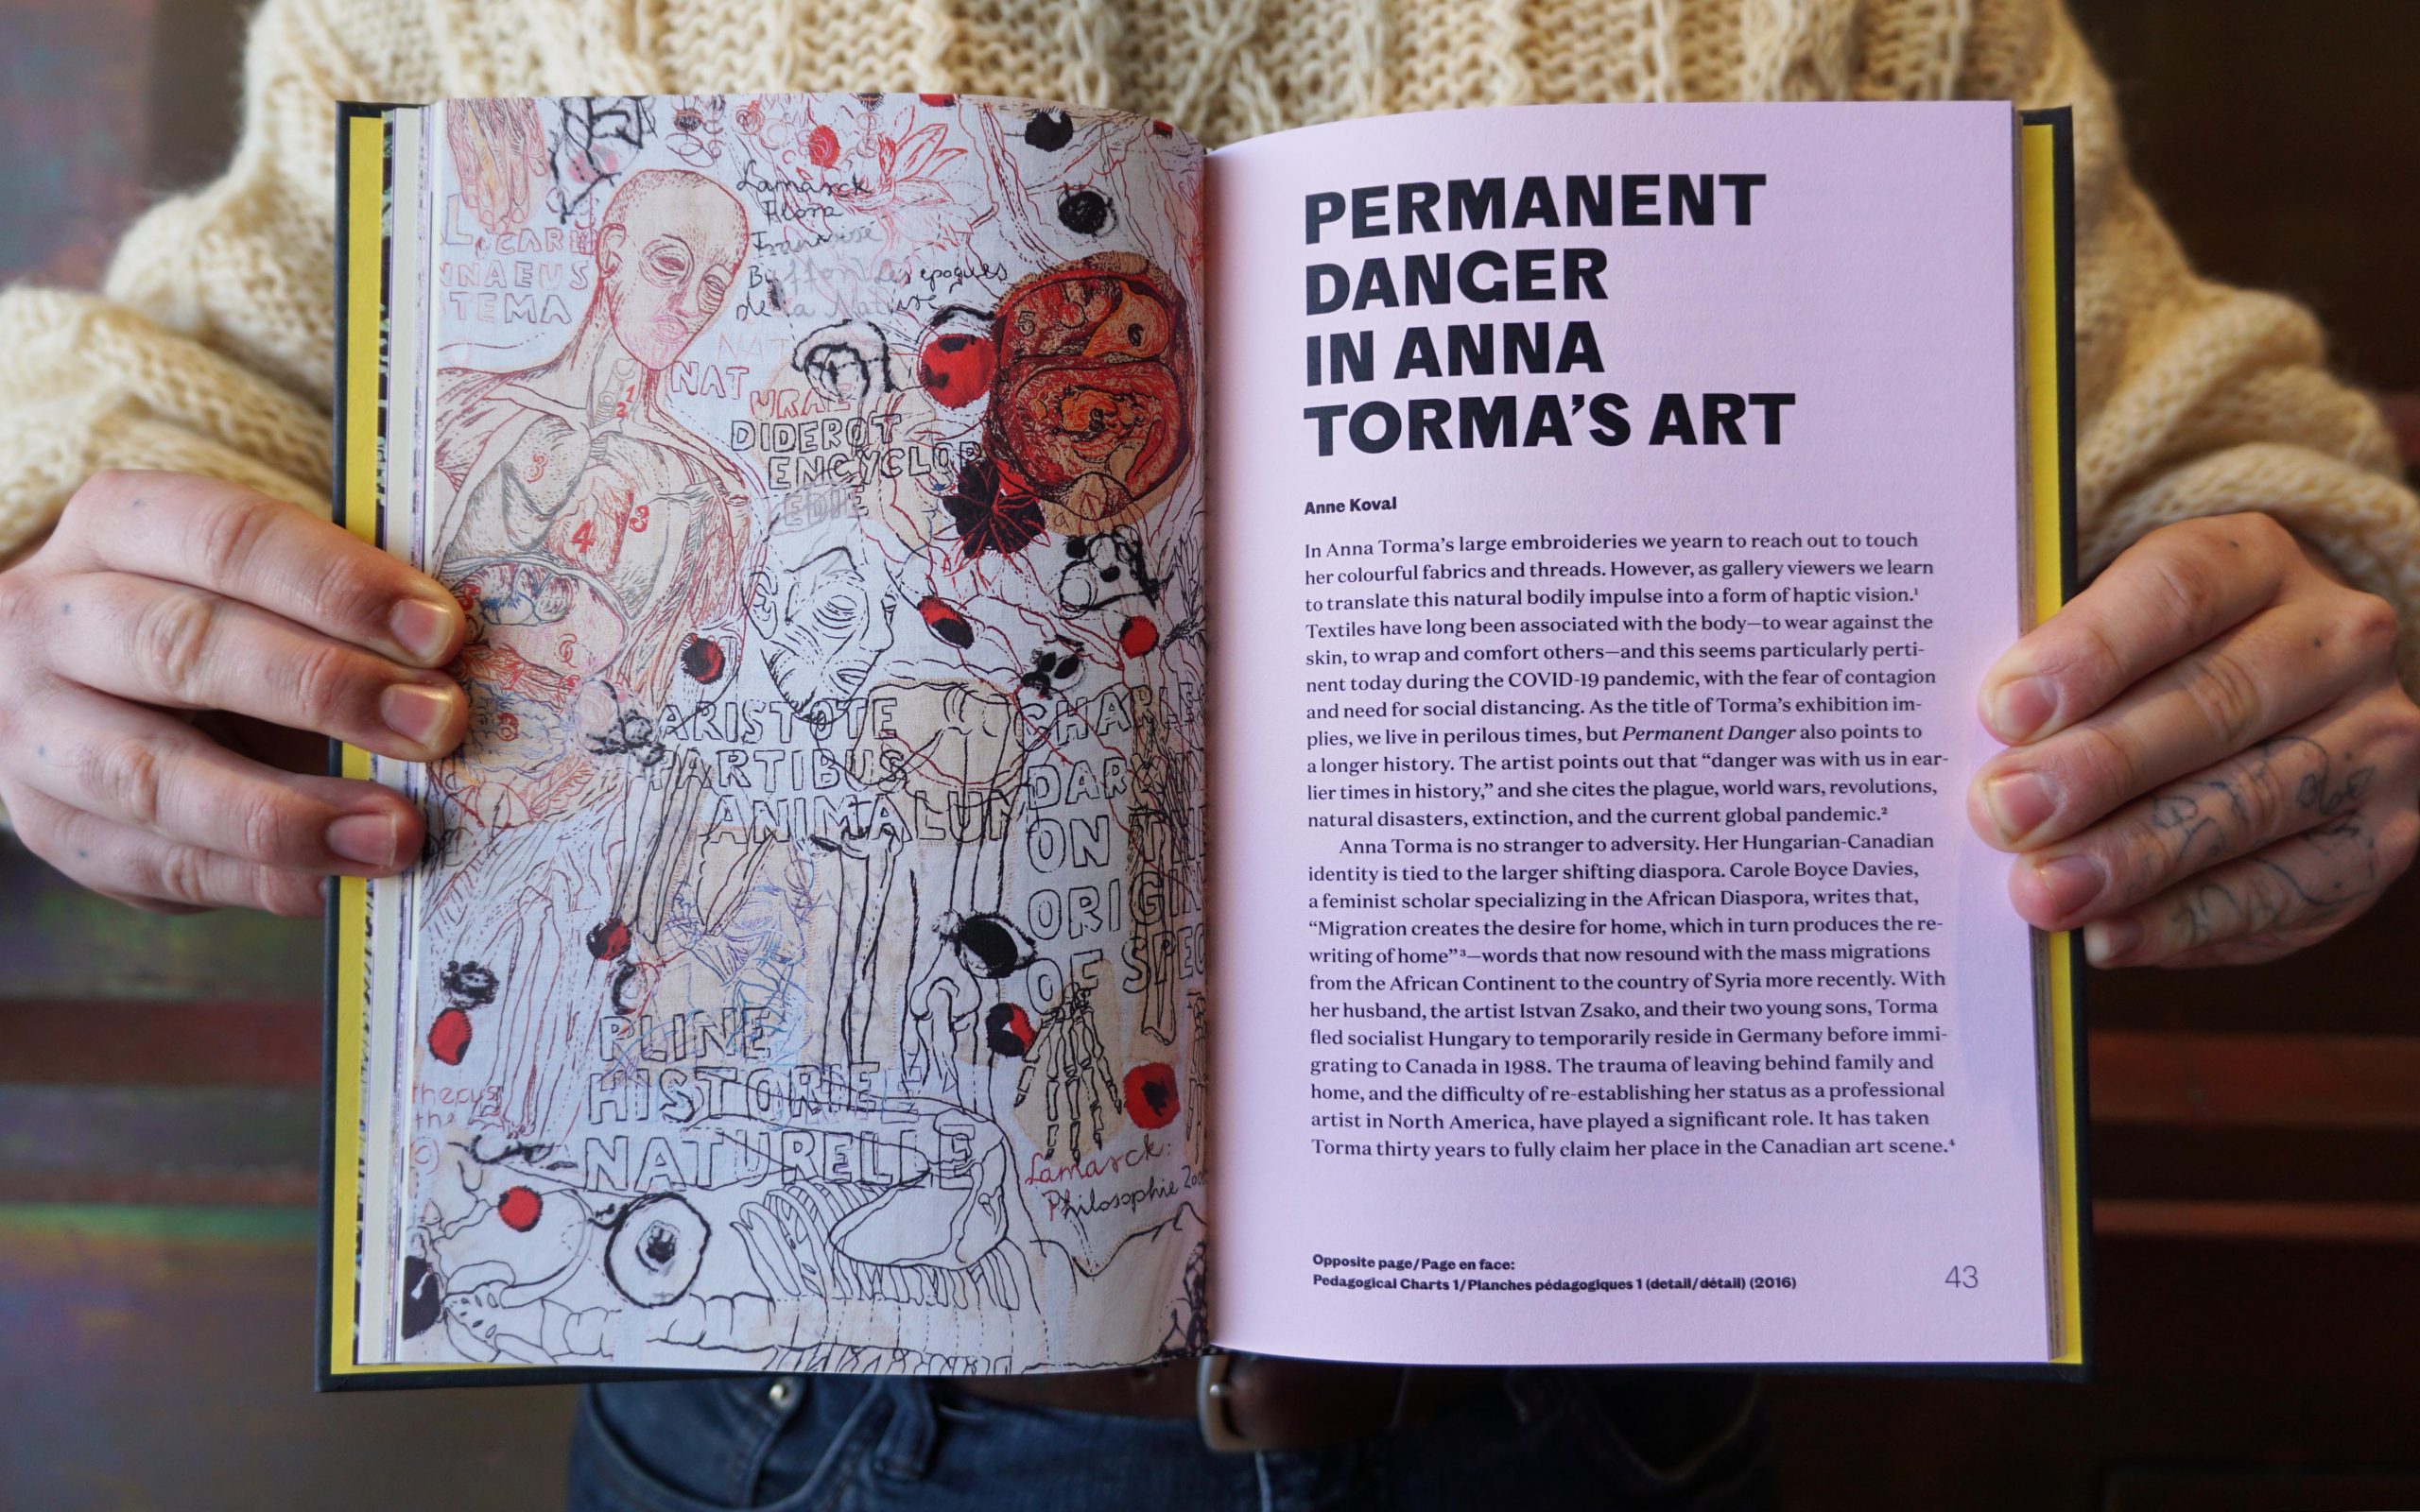 Two hands hold a hard cover book open. The left is an image of a dense embroidered artwork. On the right is an essay on pink paper titled "Permanent Danger in Anna Torma's Art".